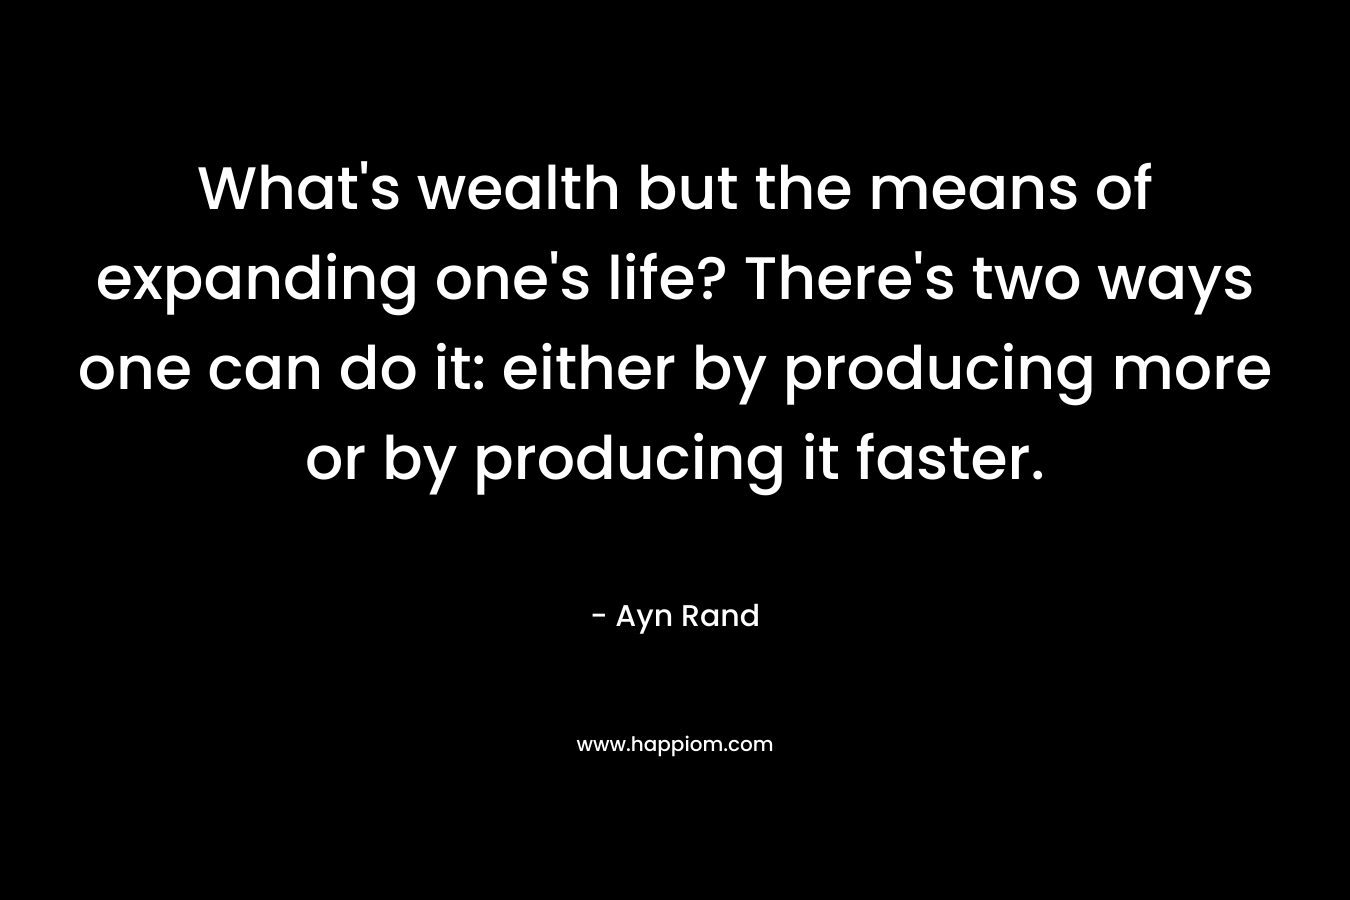 What’s wealth but the means of expanding one’s life? There’s two ways one can do it: either by producing more or by producing it faster. – Ayn Rand